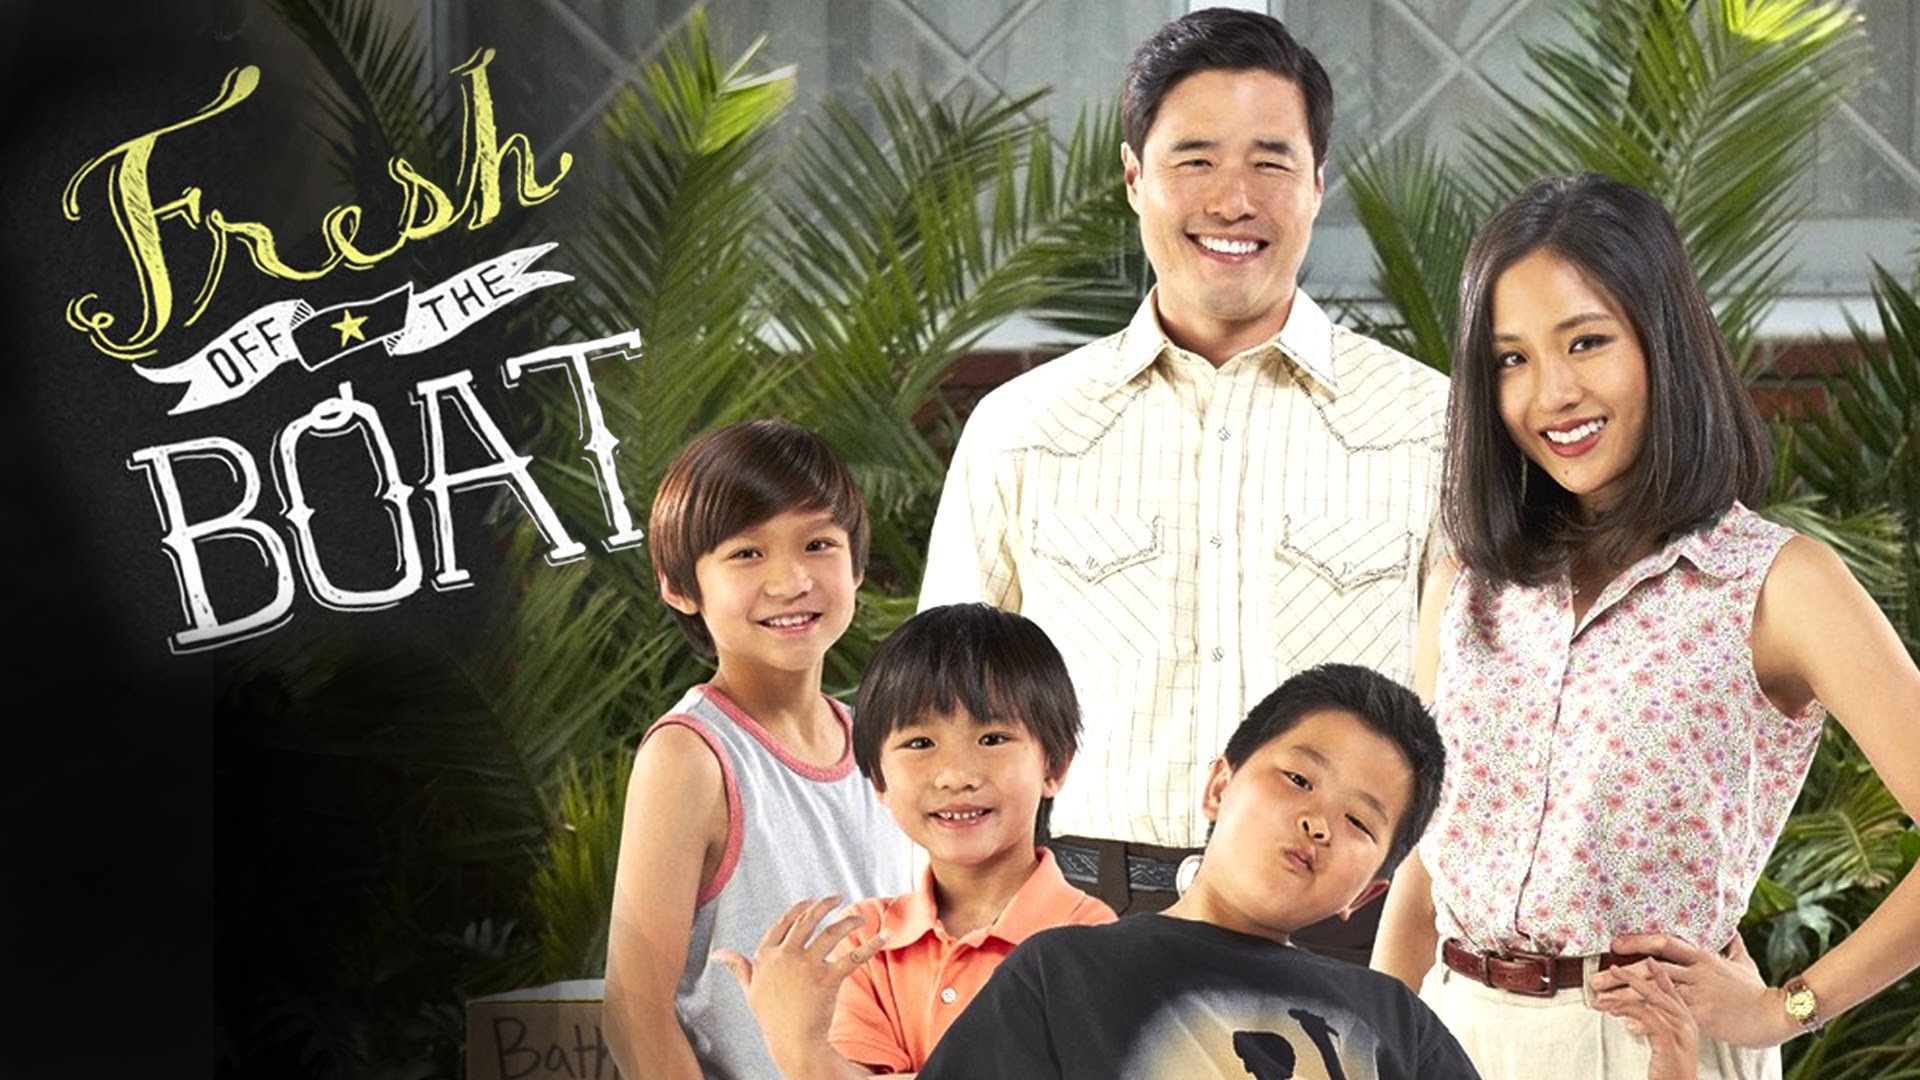 A bumpy maiden voyage for 'Fresh Off the Boat' - Los Angeles Times